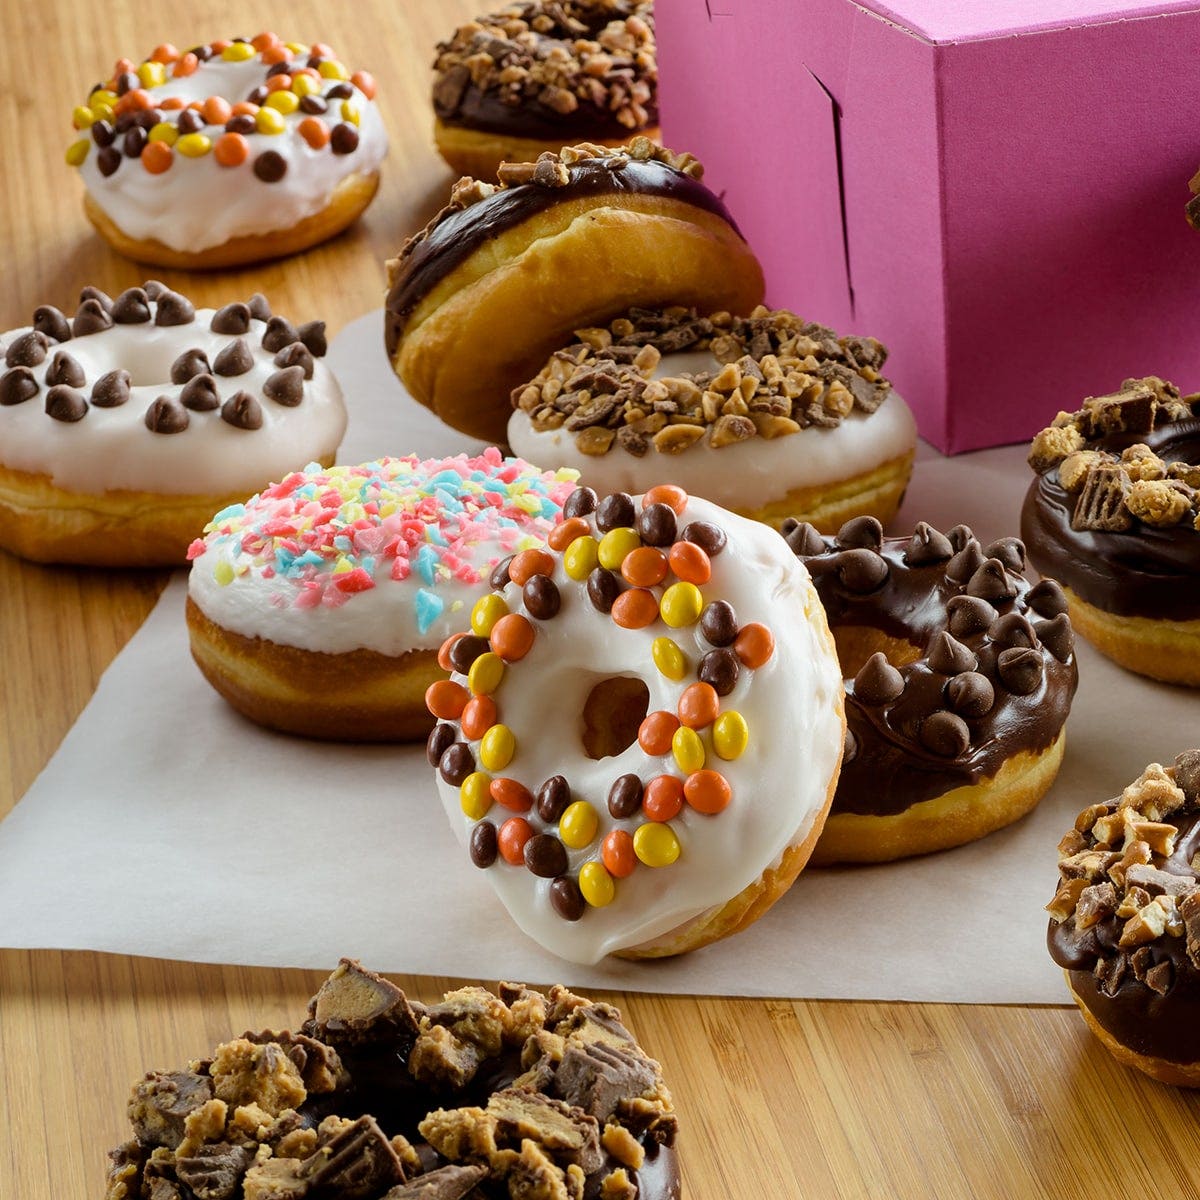 Donuts sitting on a table